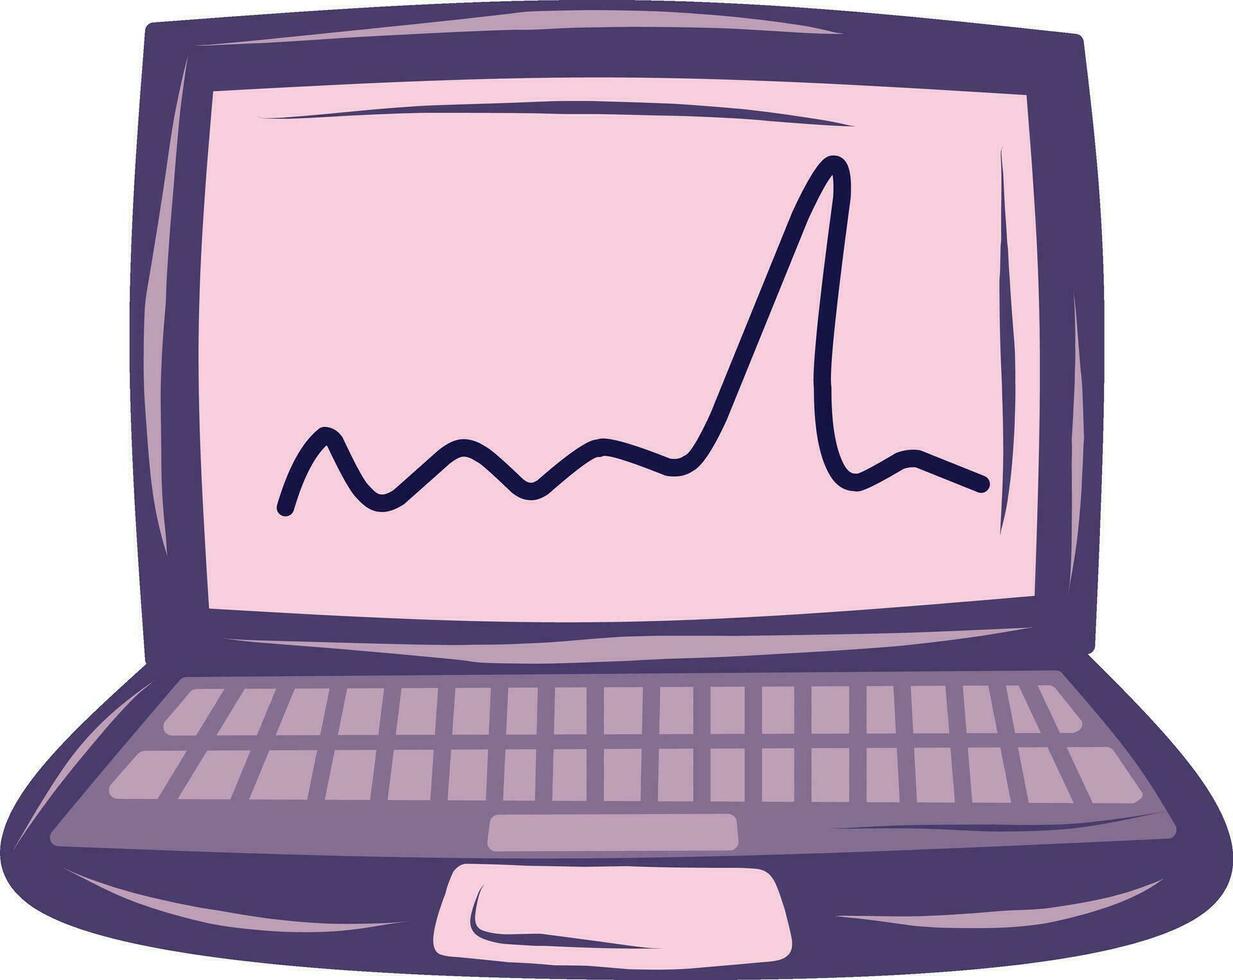 laptop computer with cardiogram icon over white background, vector illustration